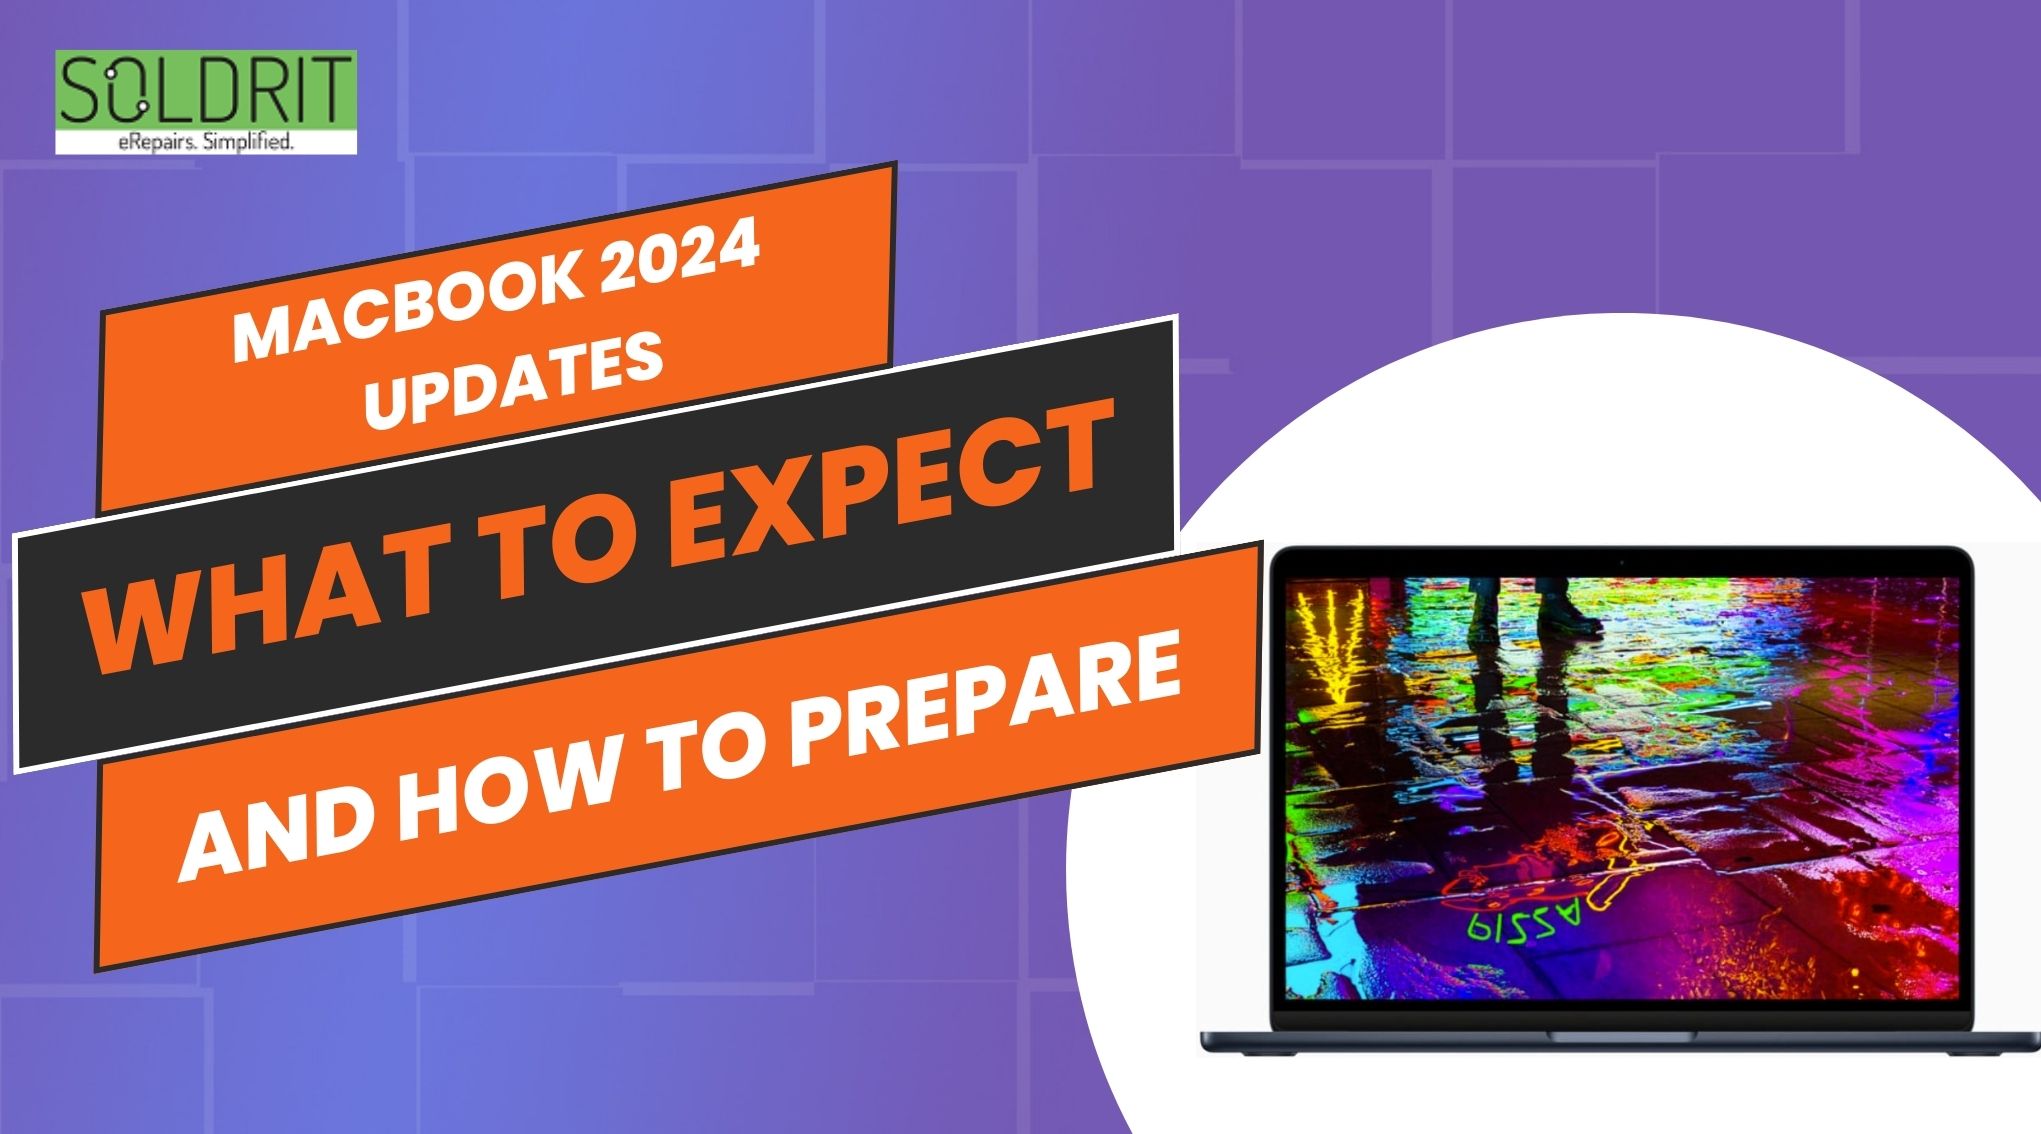 MacBook 2024 Updates What to Expect and How to Prepare